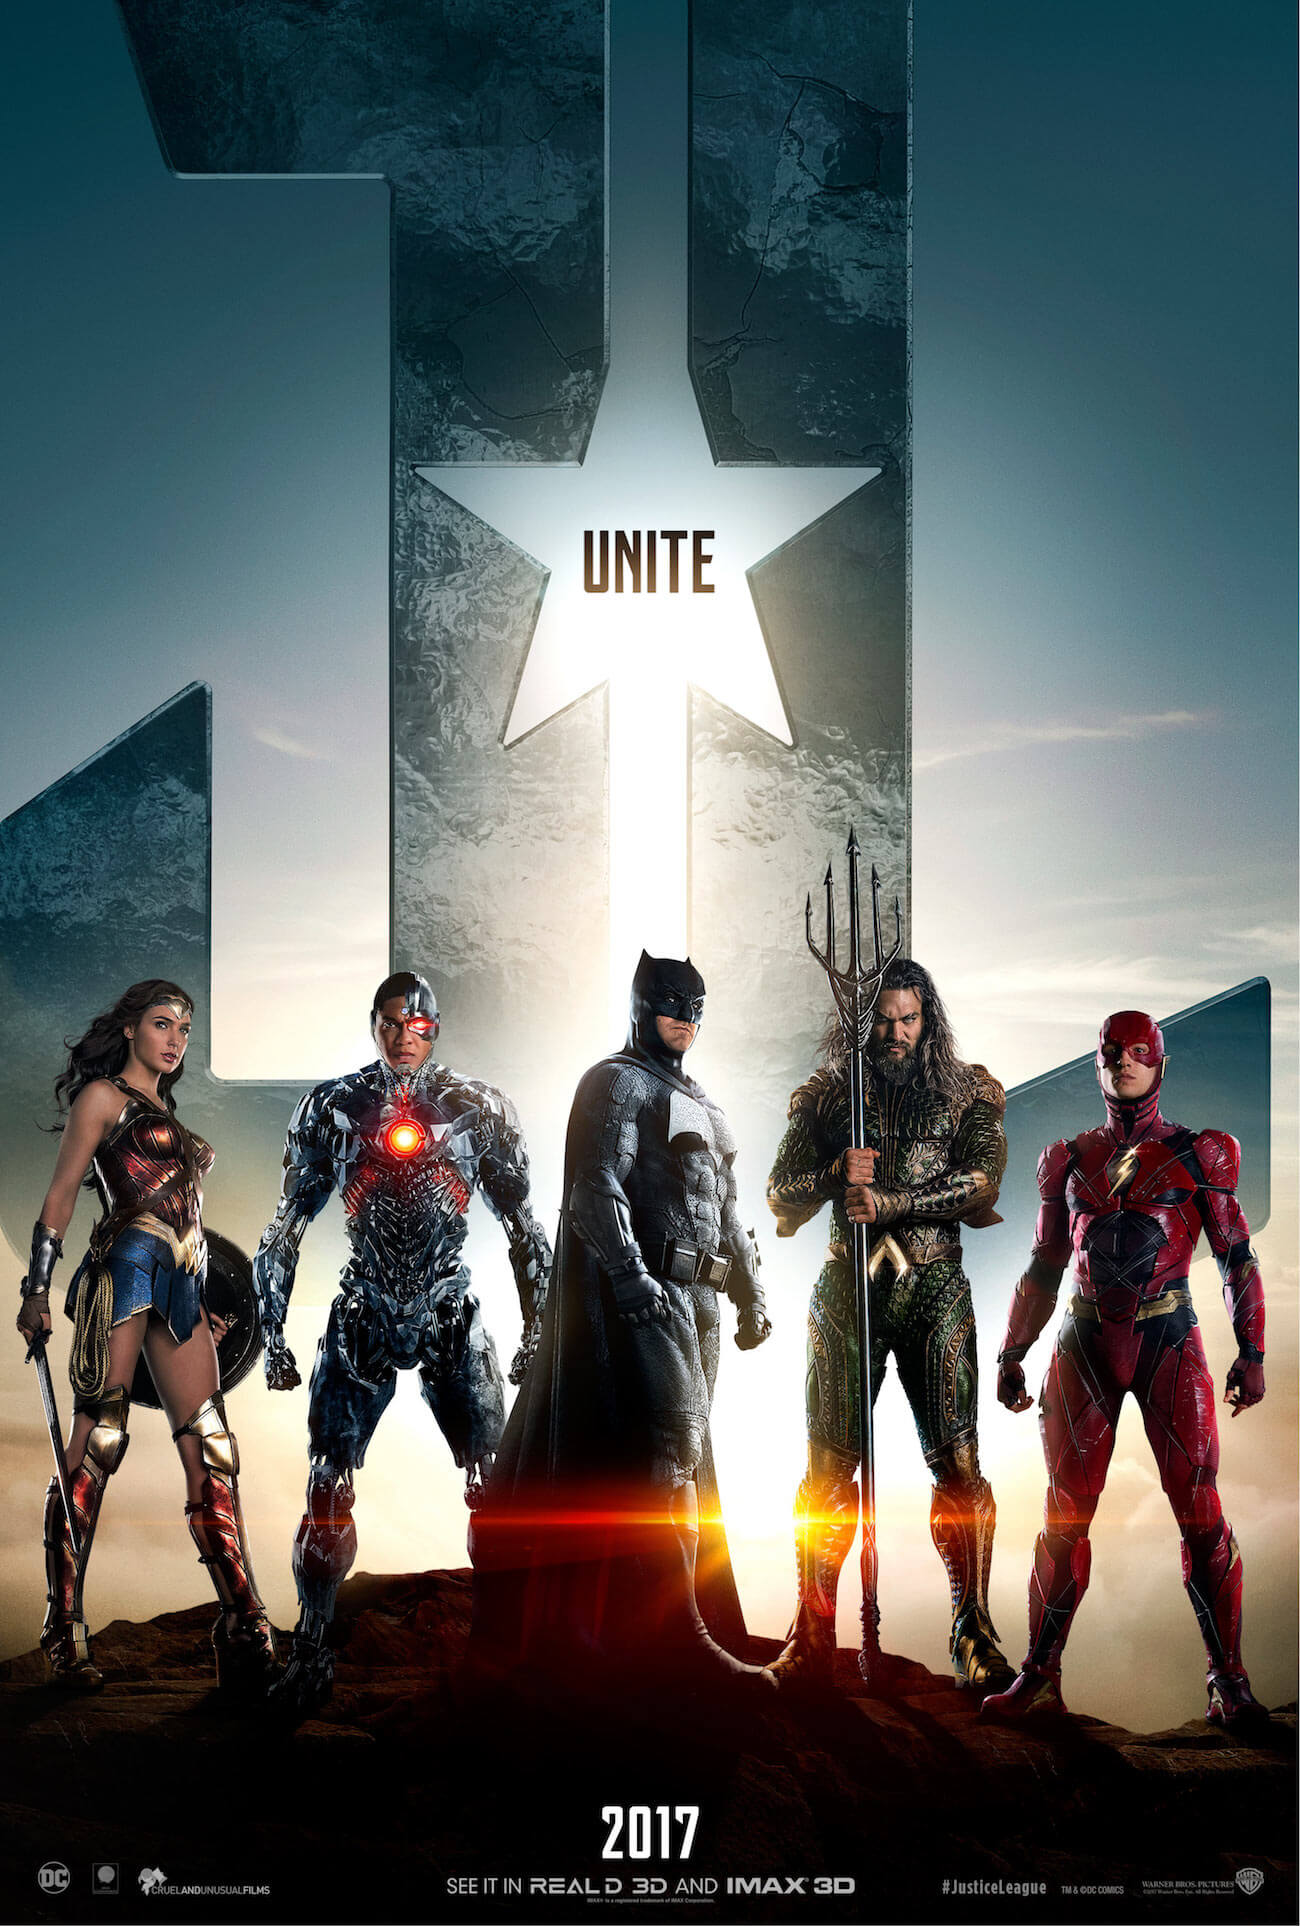 Justice league poster image full